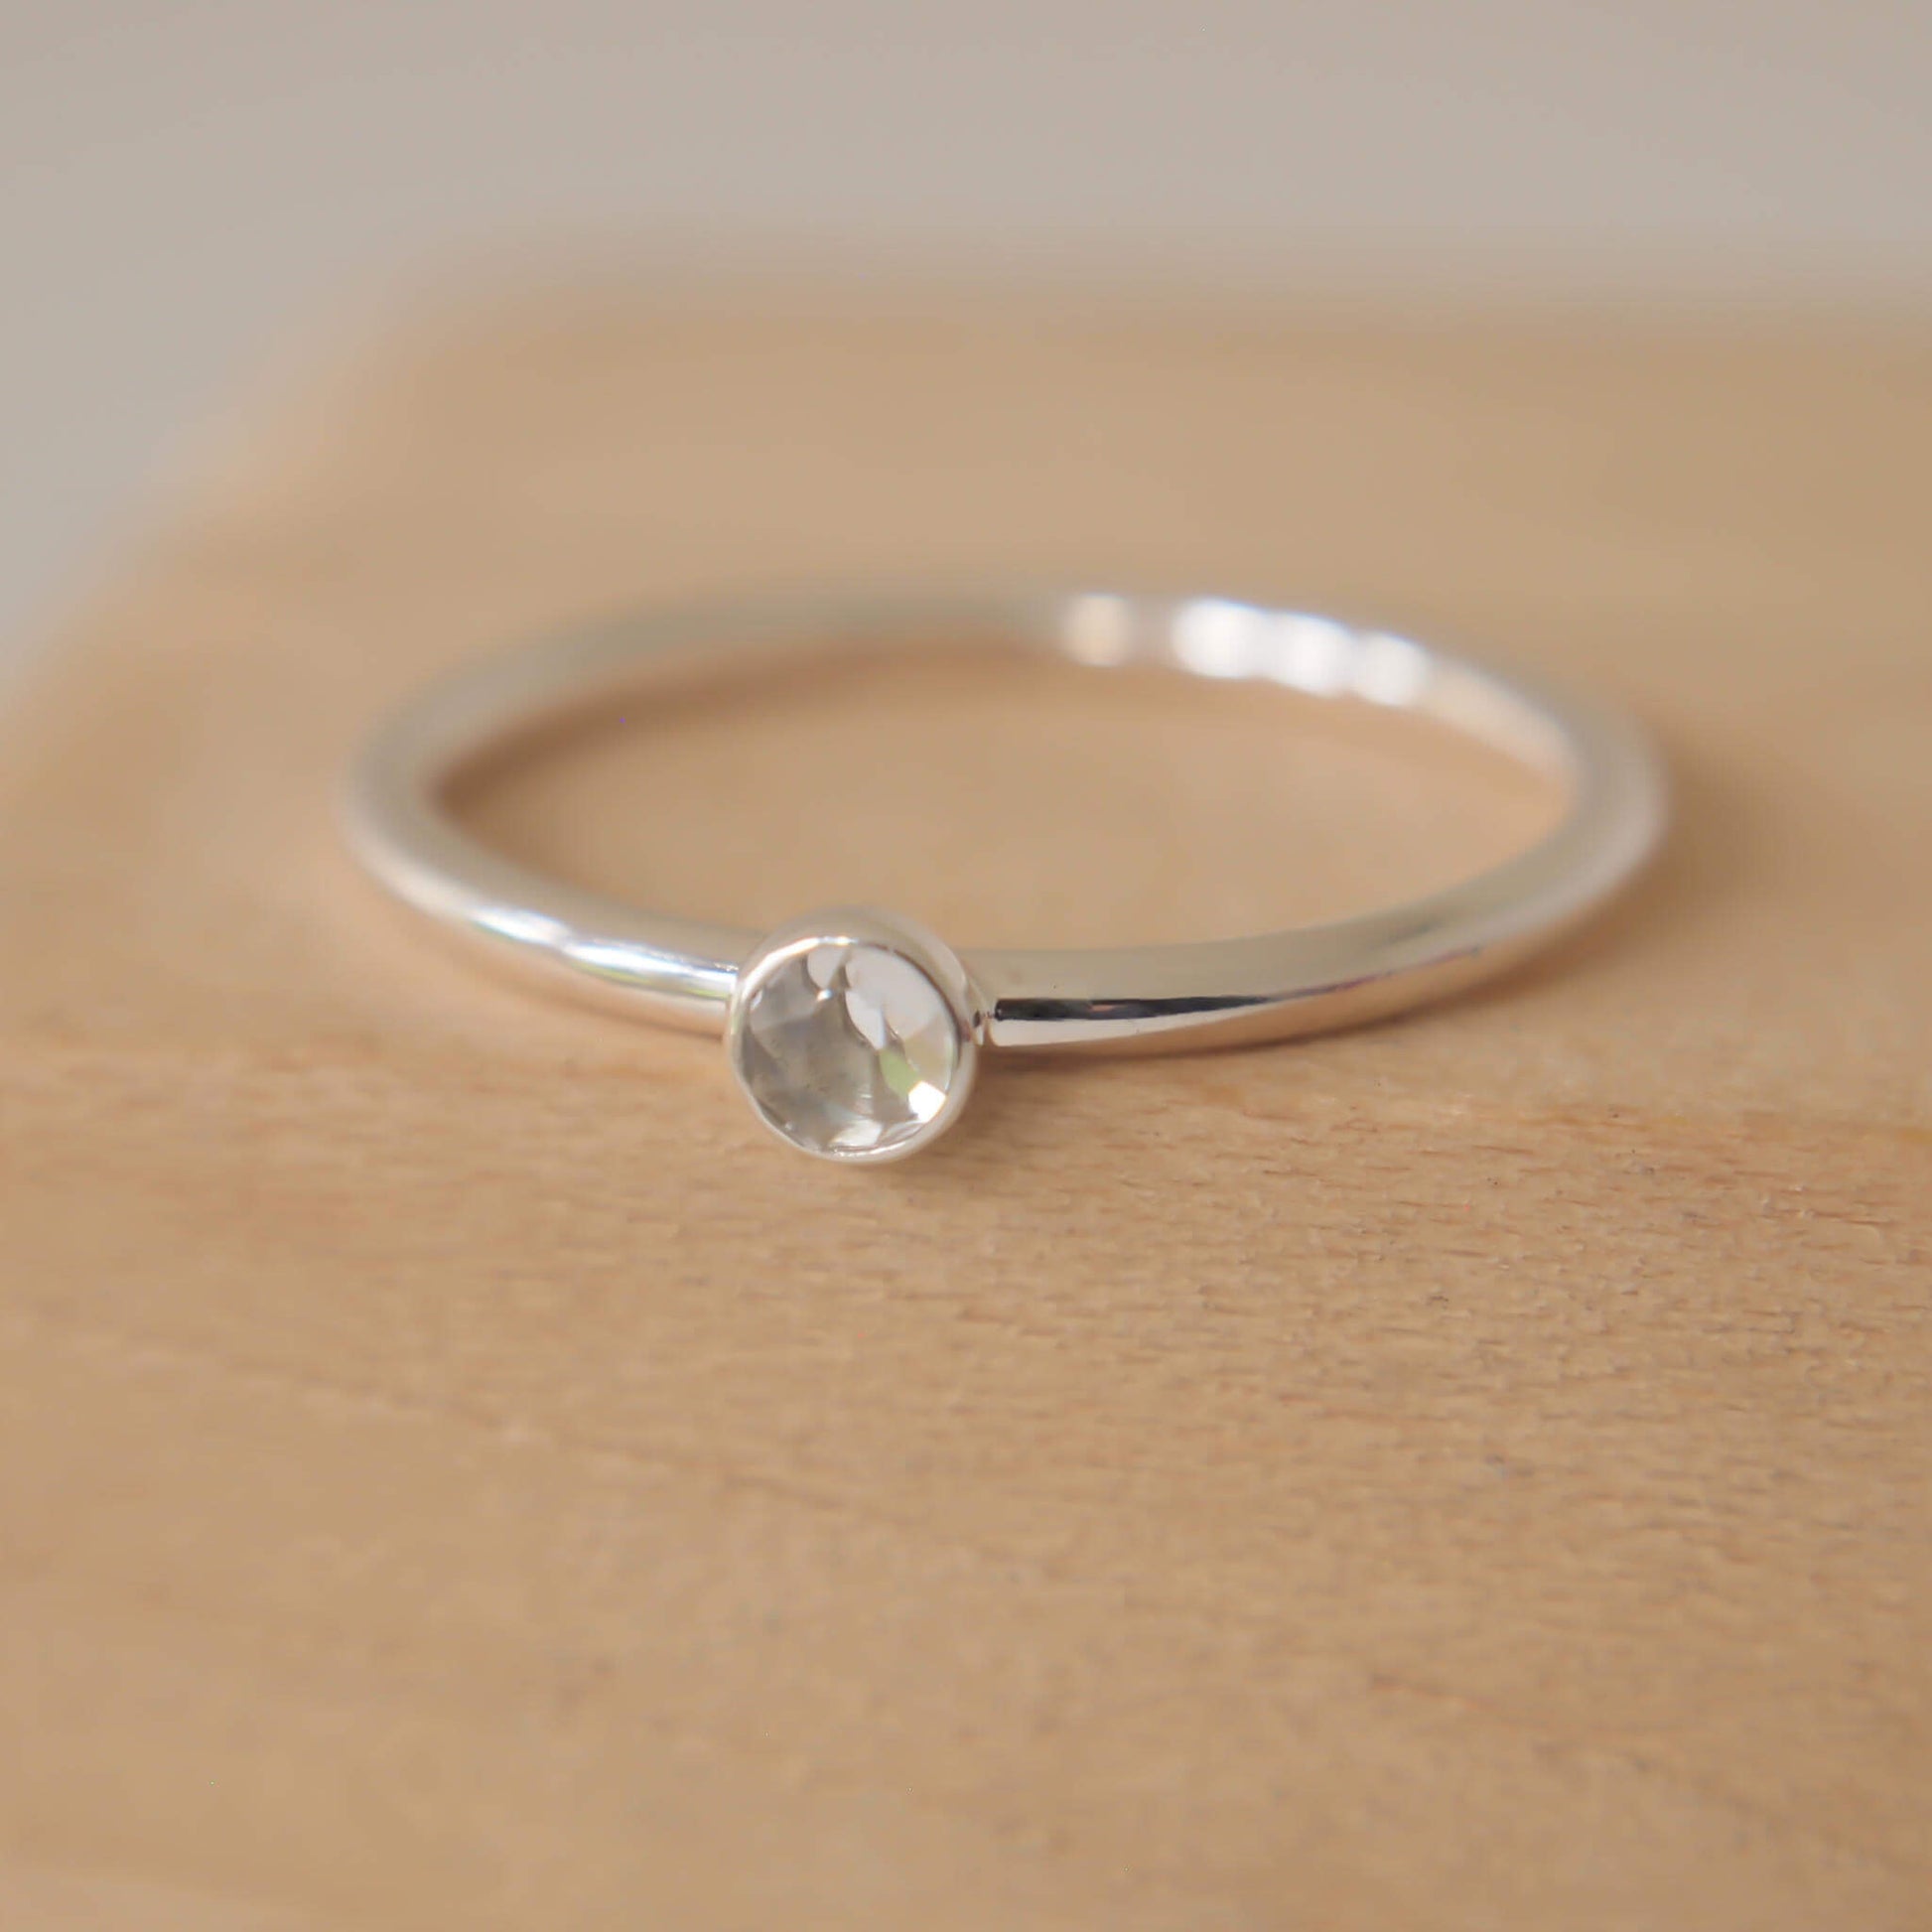 White Topaz and Silver ring. Clear faceted gemstone on a sterling silver band. Handmade in Scotland by maram jewellery